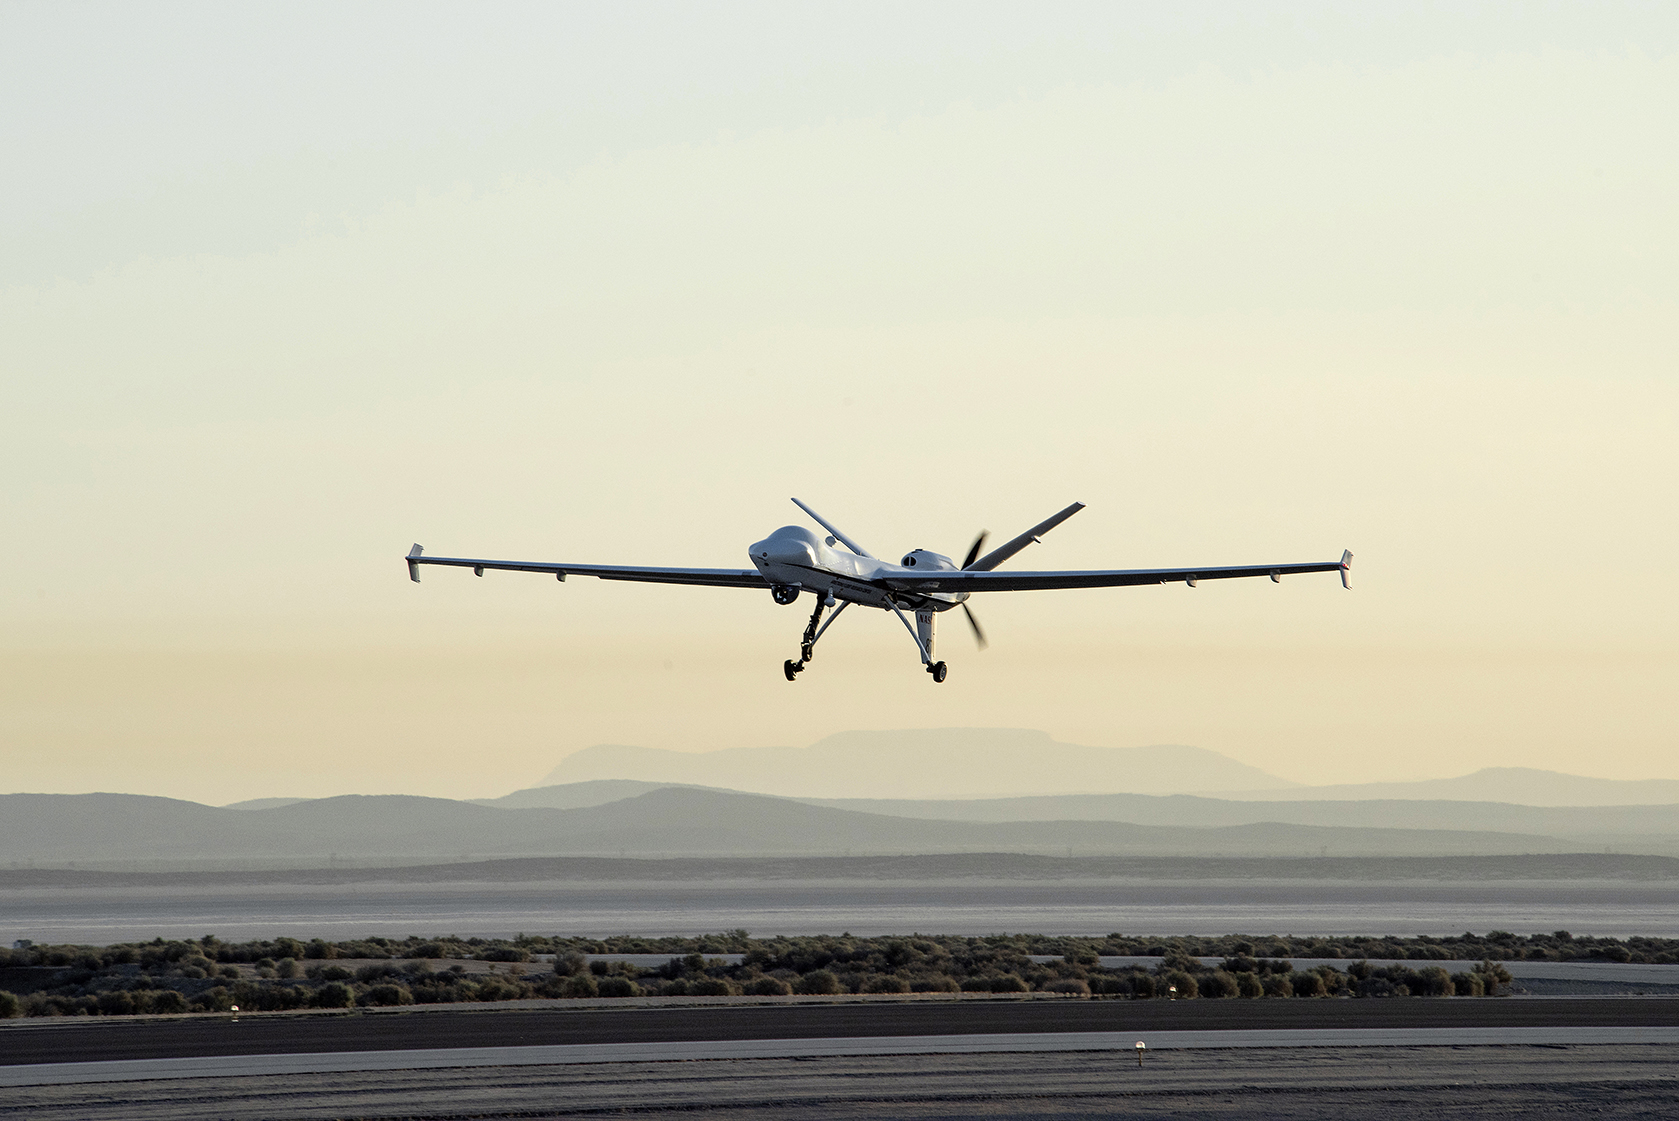 NASA’s remotely-piloted Ikhana aircraft flew its first mission without a chase plane.